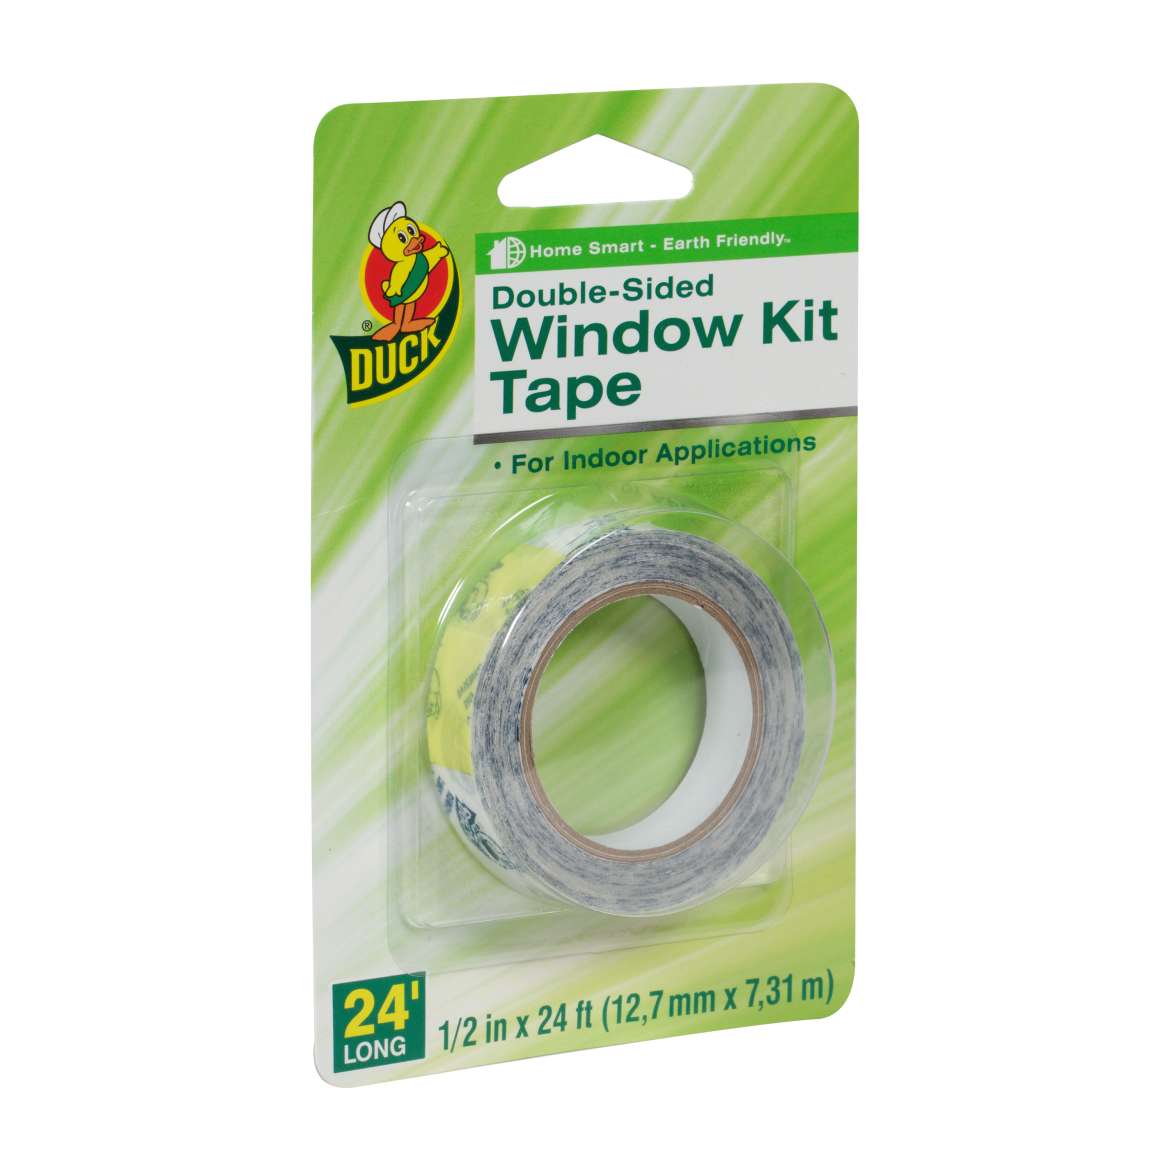 Duck Brand WKRT Window Kit Replacement Tape [Double-Sided]